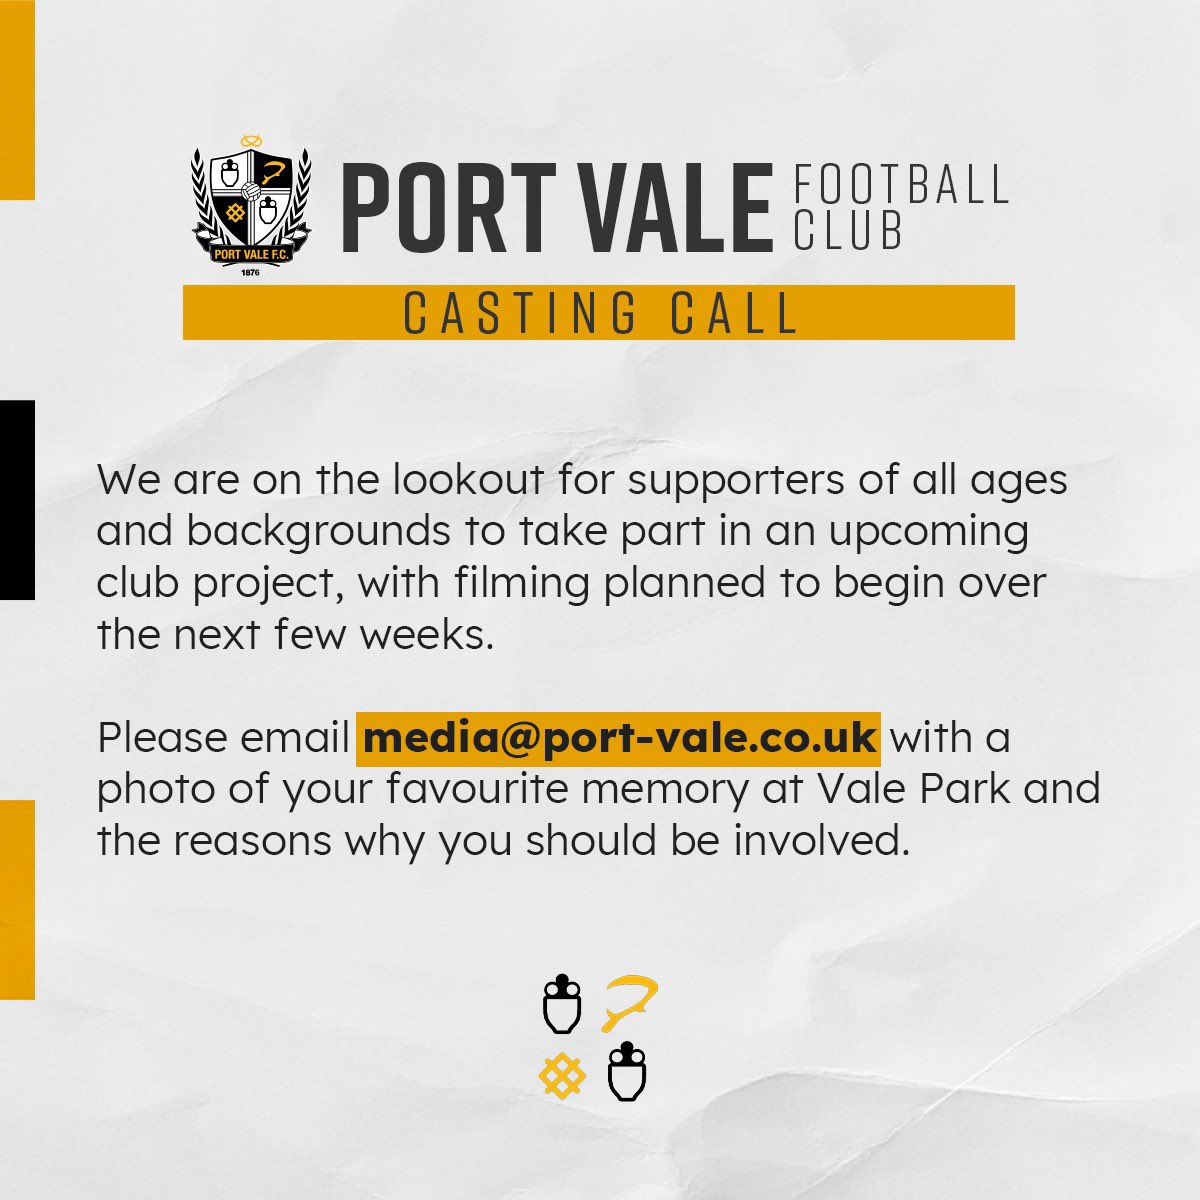 Do you want to be involved in a club project taking place over the next few weeks? 👀 Email media@port-vale.co.uk with a photo of your favourite memory at Vale Park and the reasons why you should be involved!👇